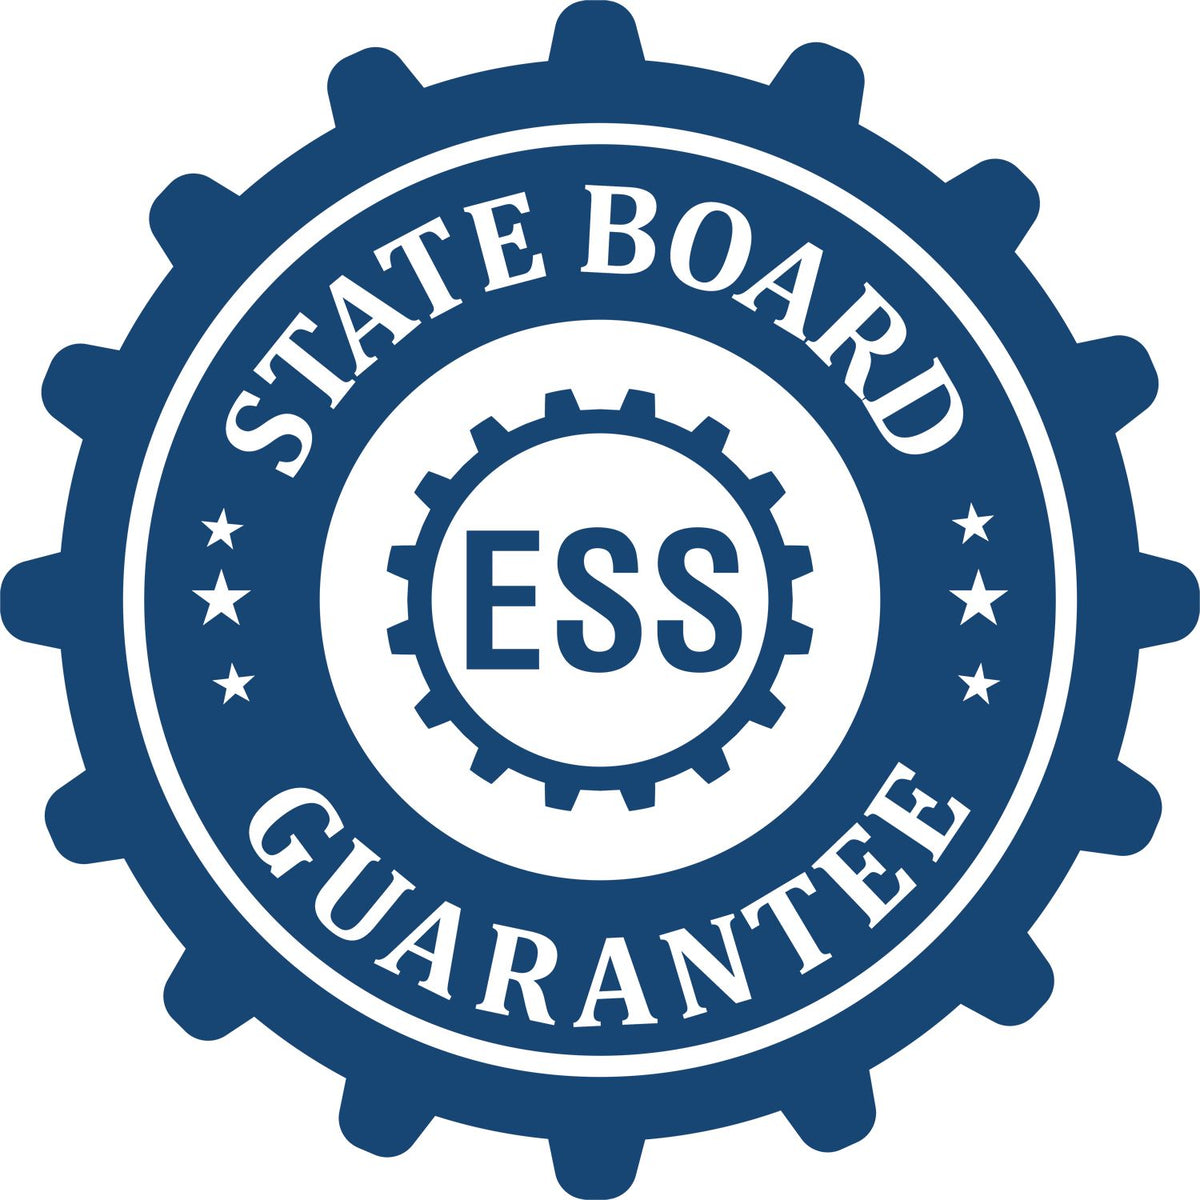 An emblem in a gear shape illustrating a state board guarantee for the New Jersey Engineer Desk Seal product.